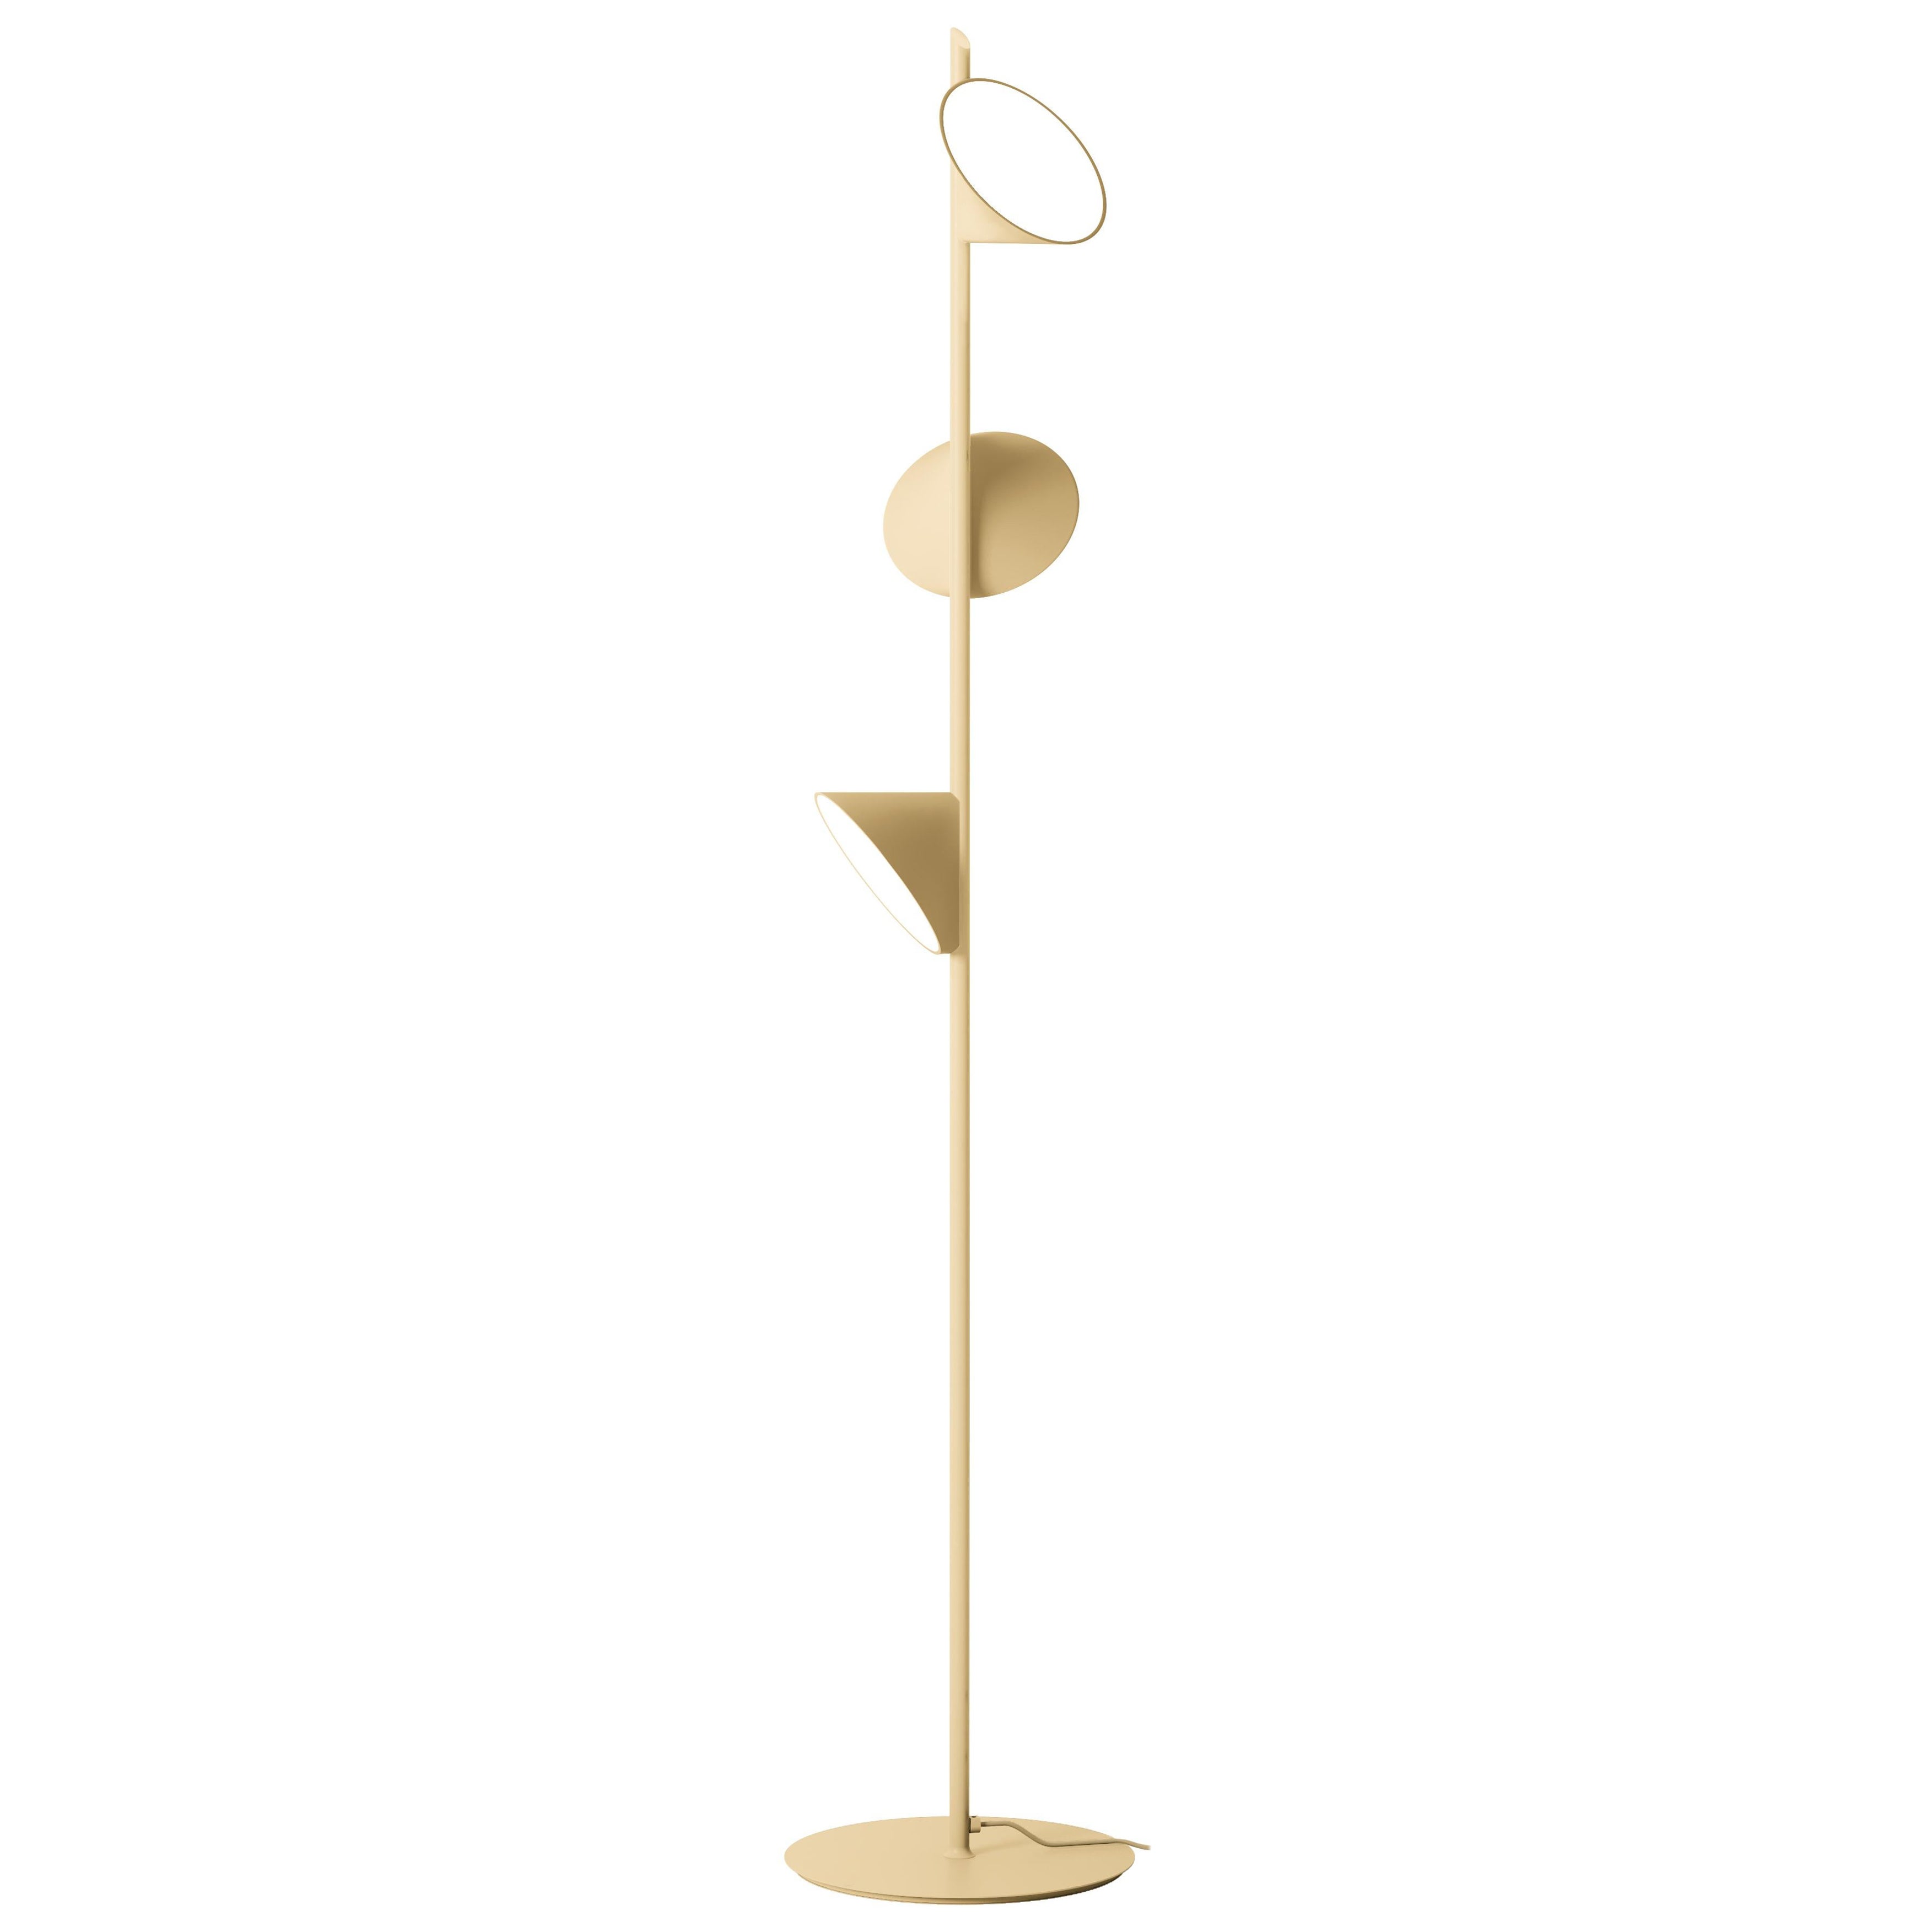 Axolight Orchid Floor Lamp with Aluminum Body in Sand by Rainer Mutsch